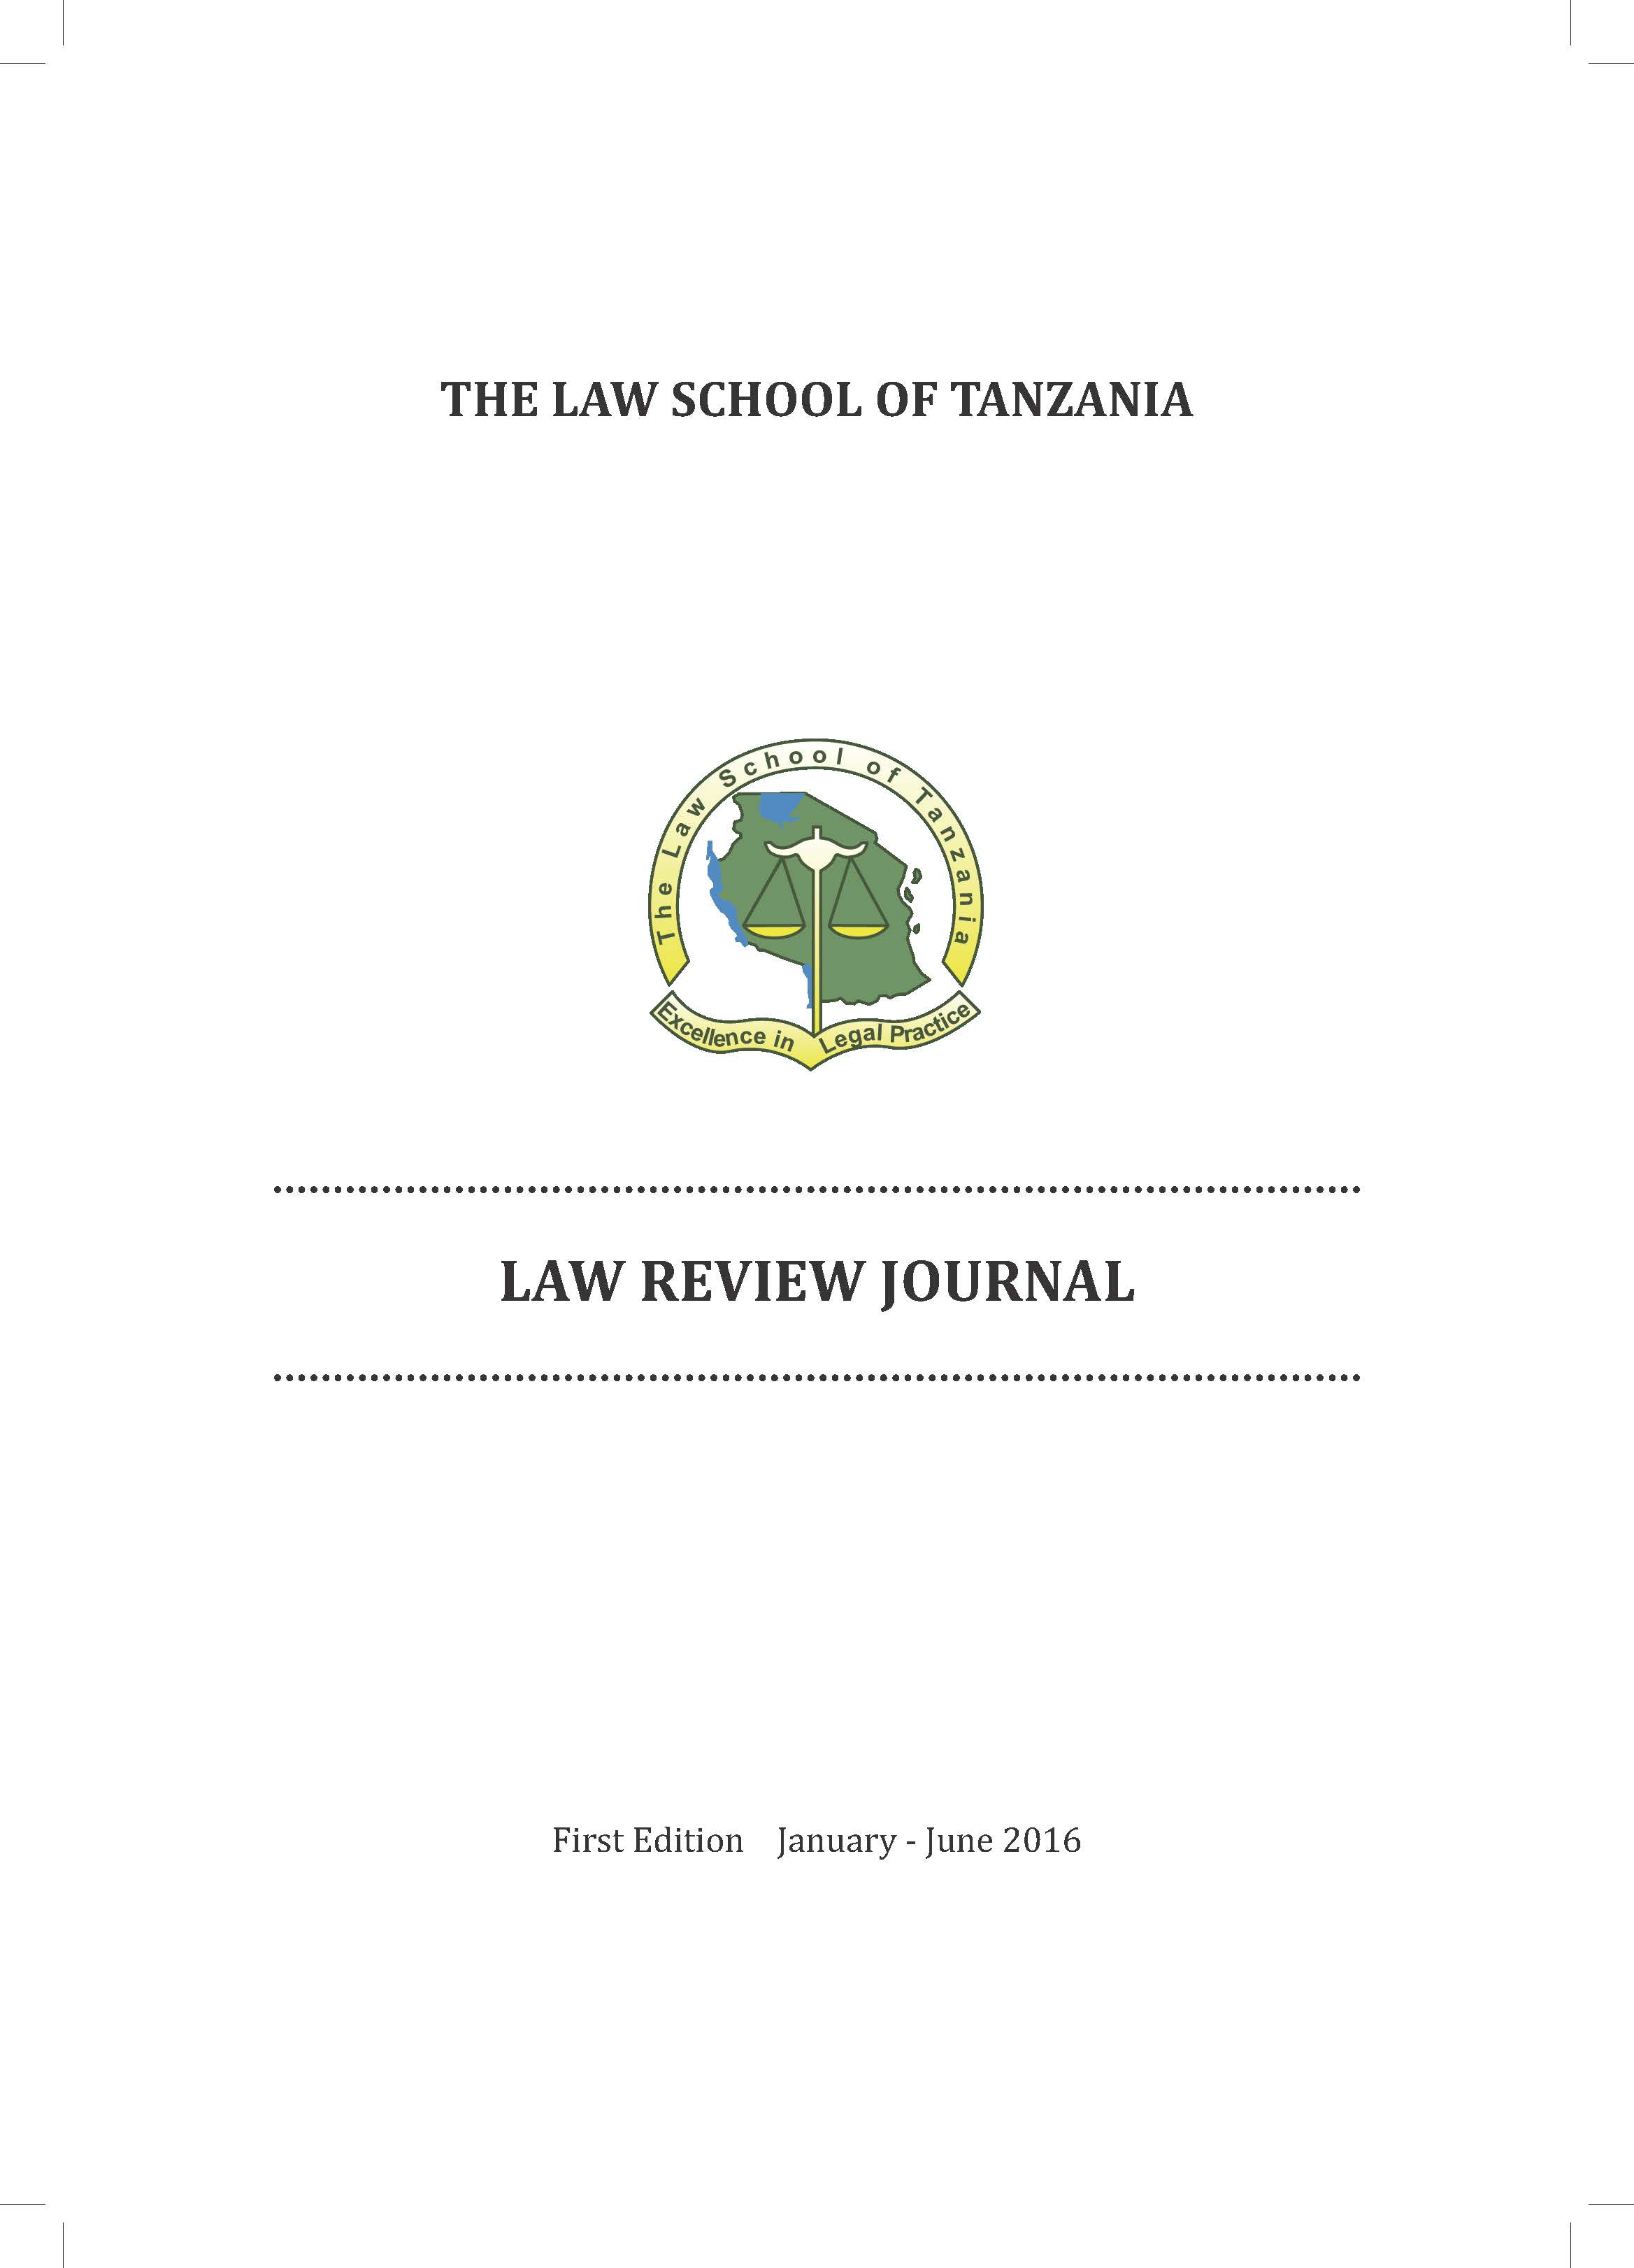 					View Vol. 1 No. 1 (2016): LST LAW REVIEW
				